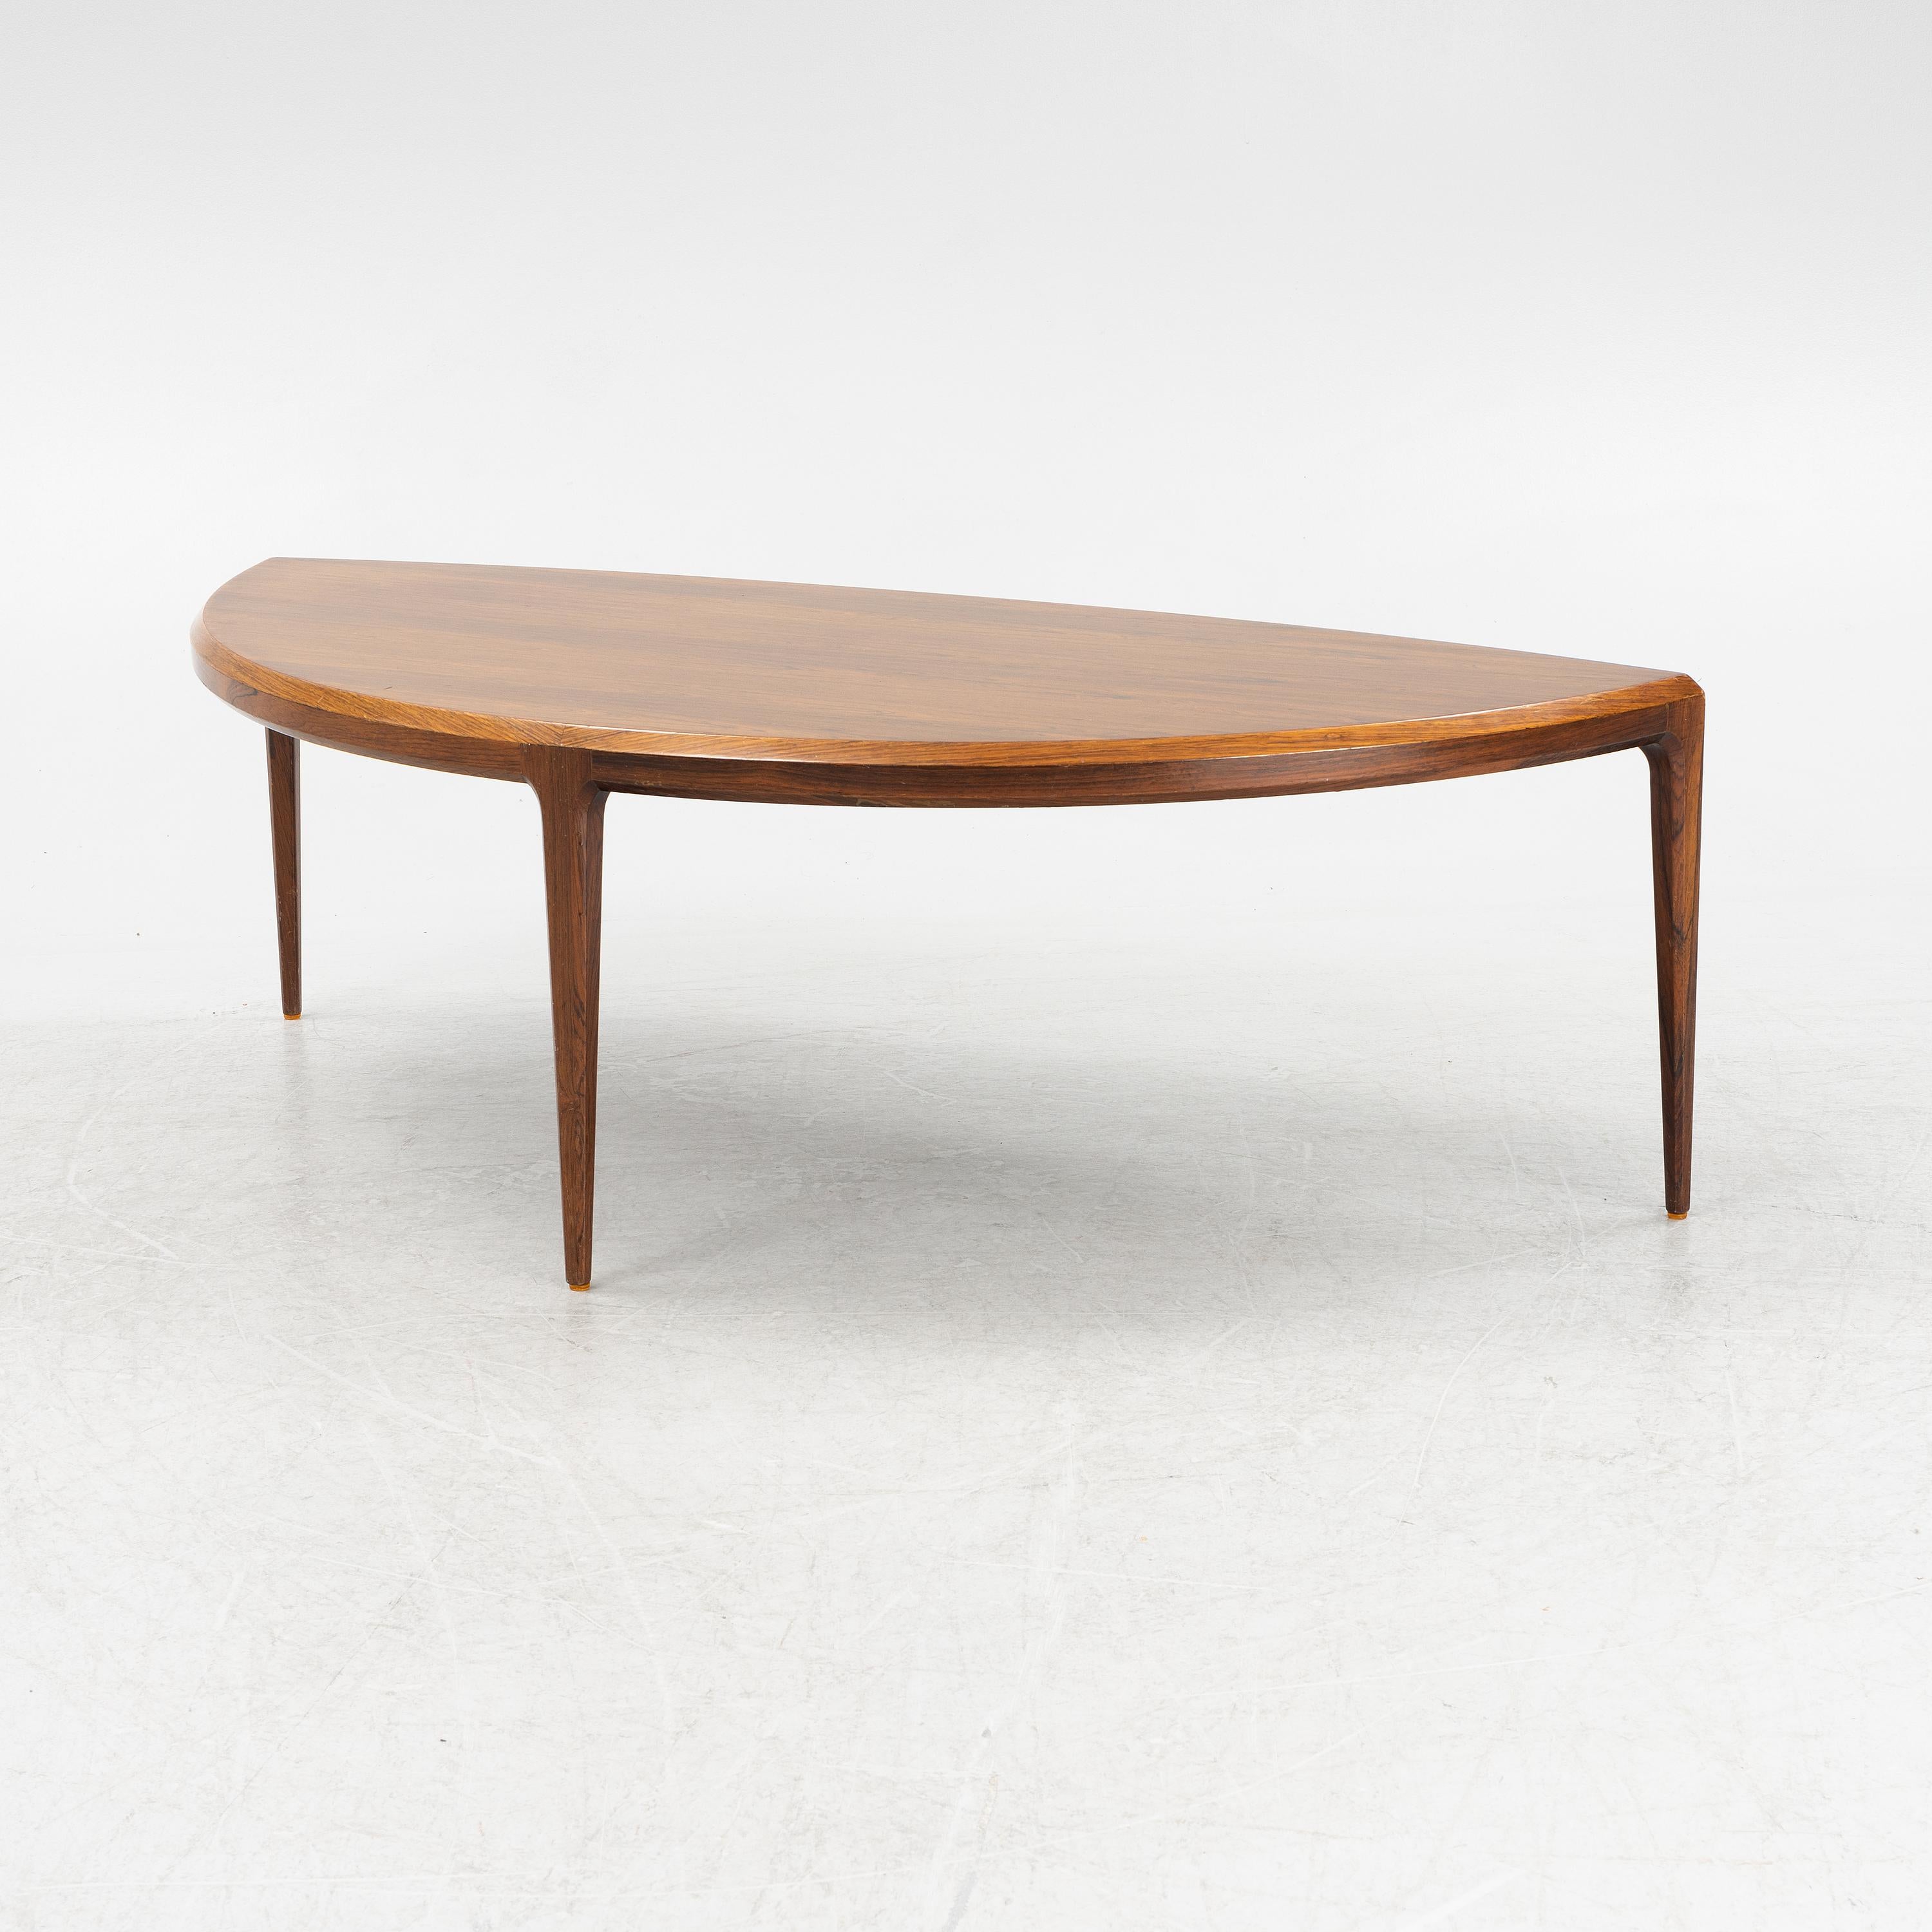 Organic shaped coffee table with tapered solid wood legs, designed in the 1060s by Johannes Andersen for CFC Silkeborg in Denmark. Very good original condition.